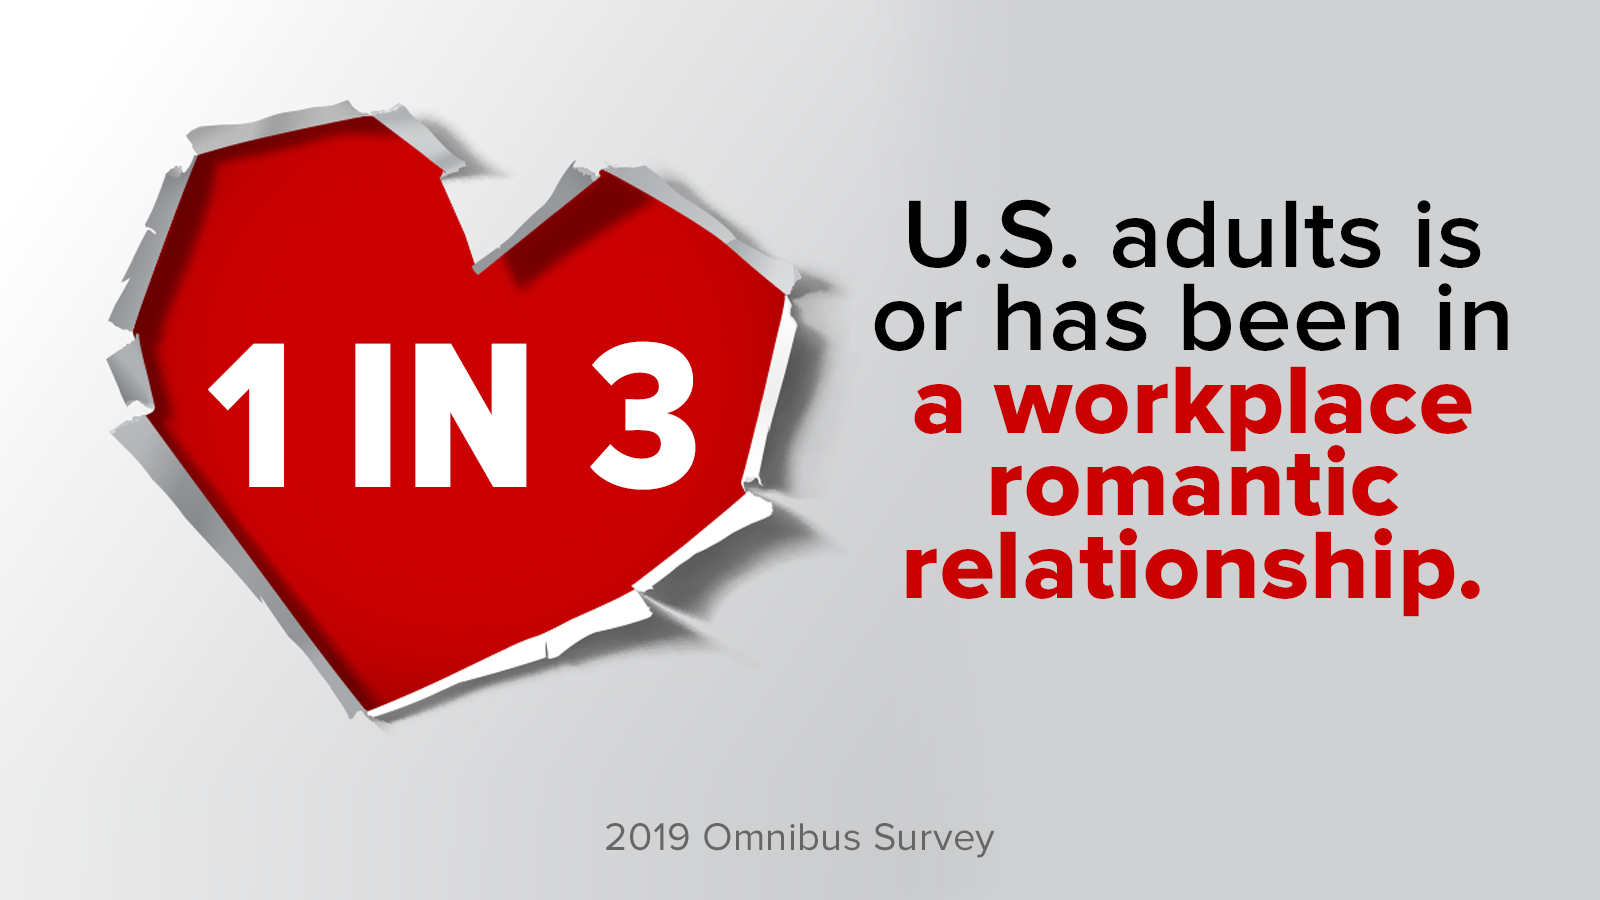 1 in 3 SHRM_WorkplaceRomance graphic.png